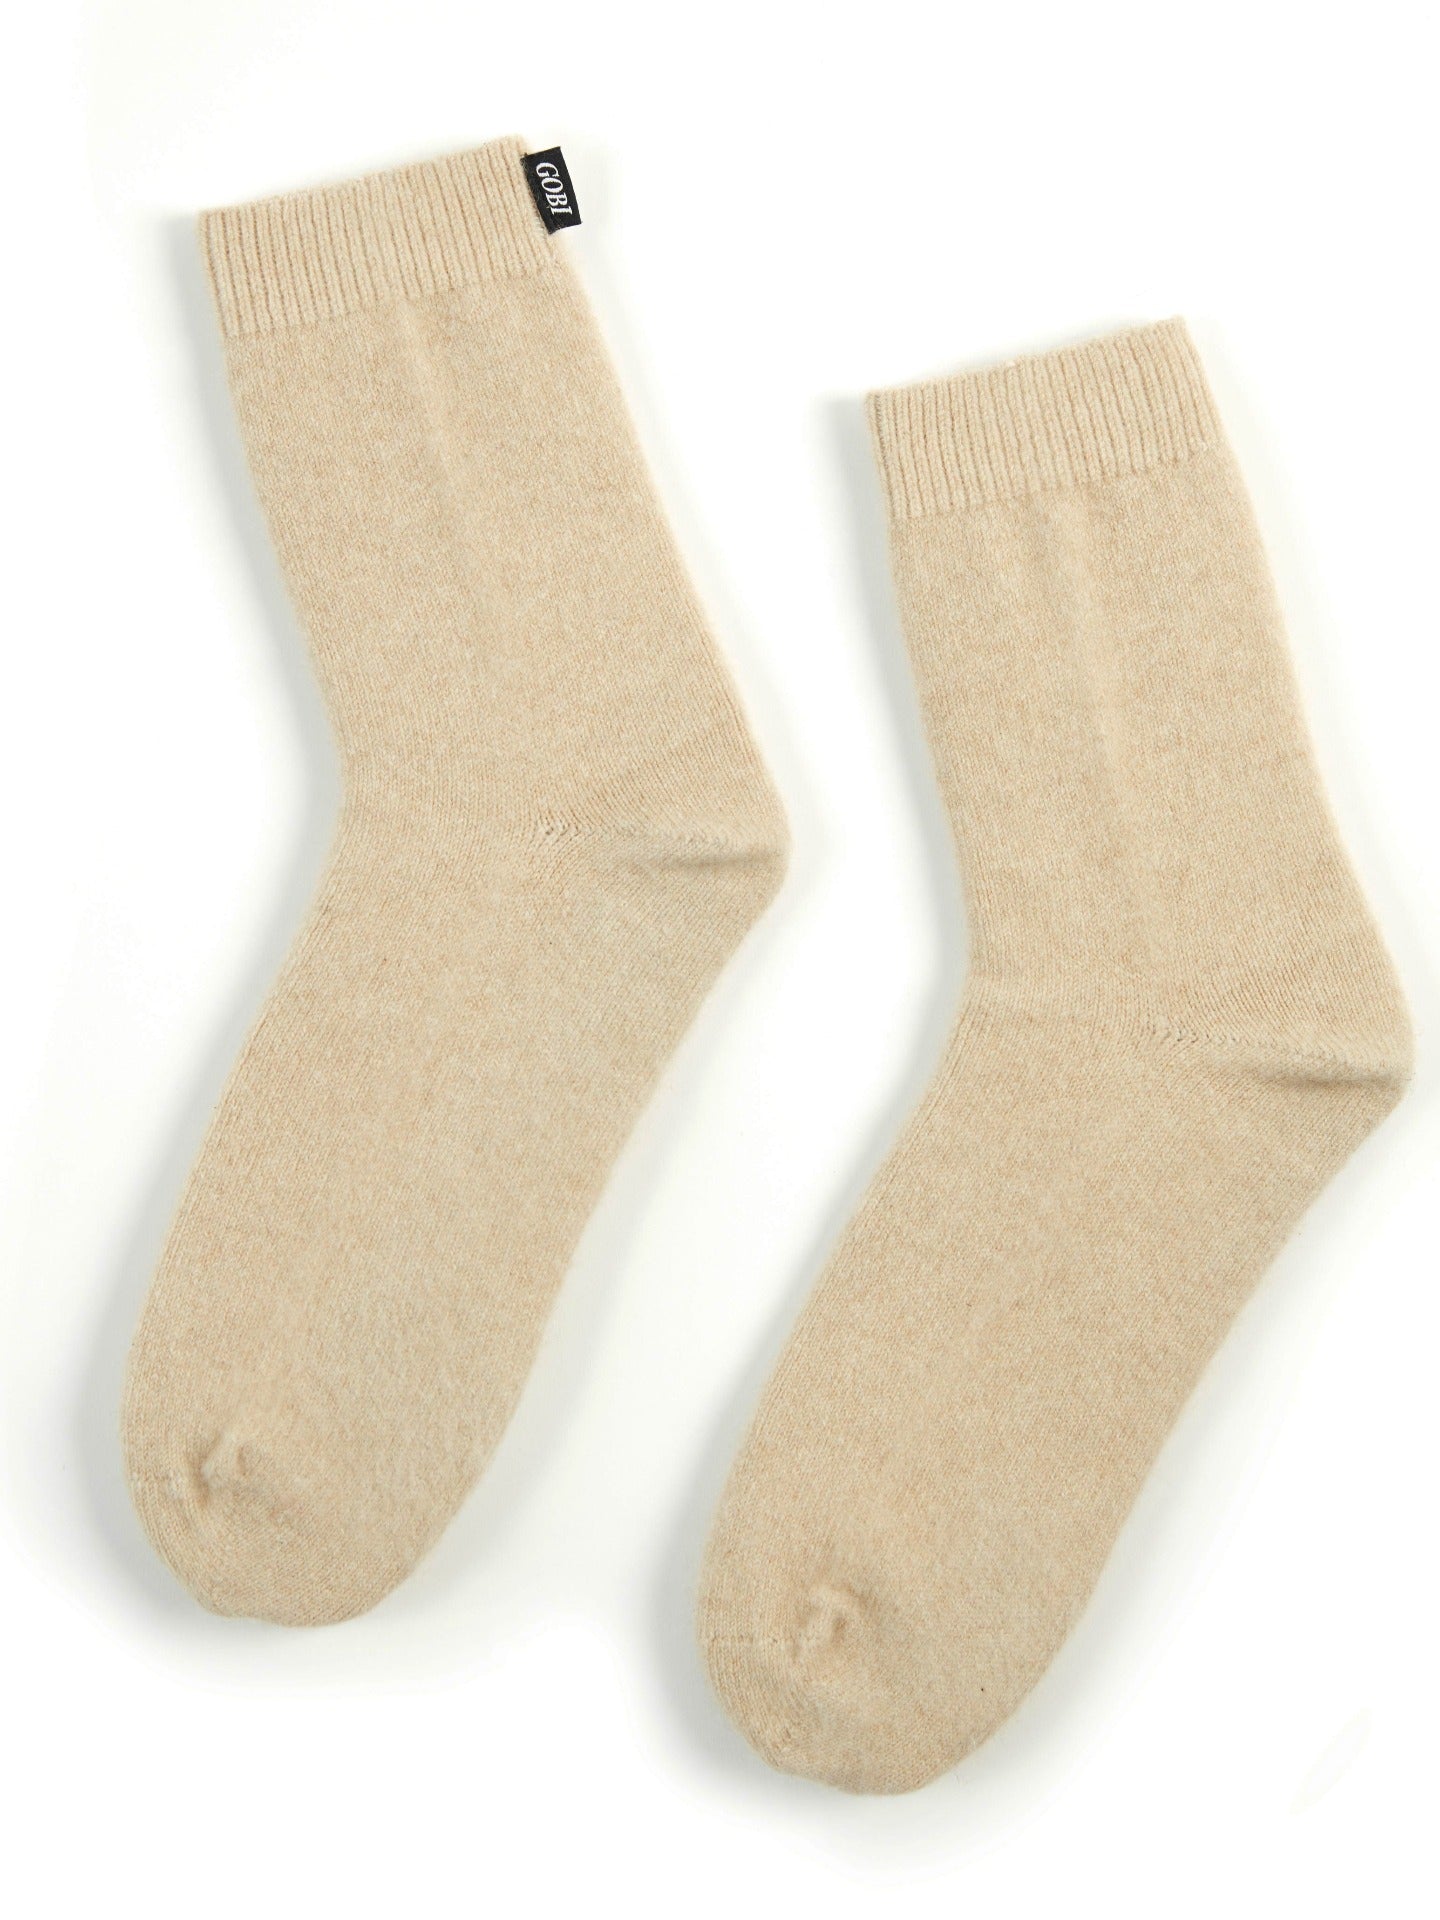 Discover Unmatched Comfort with Cashmere Socks | GOBI Cashmere